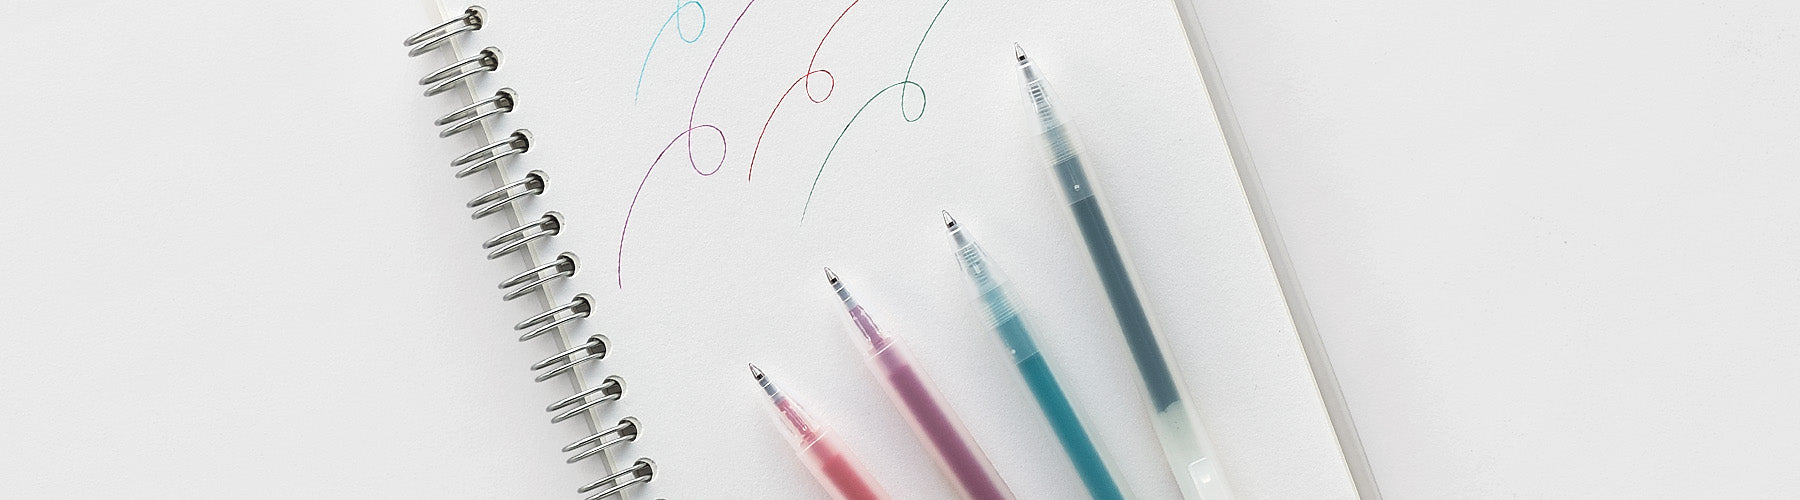 MUJI USA on X: Our Gel Ink Ballpoint Pens are ideal for color coding  notes, drawing and labeling diagrams, and writing smoothly across paper.  Find them in stores or online. (Photo credit